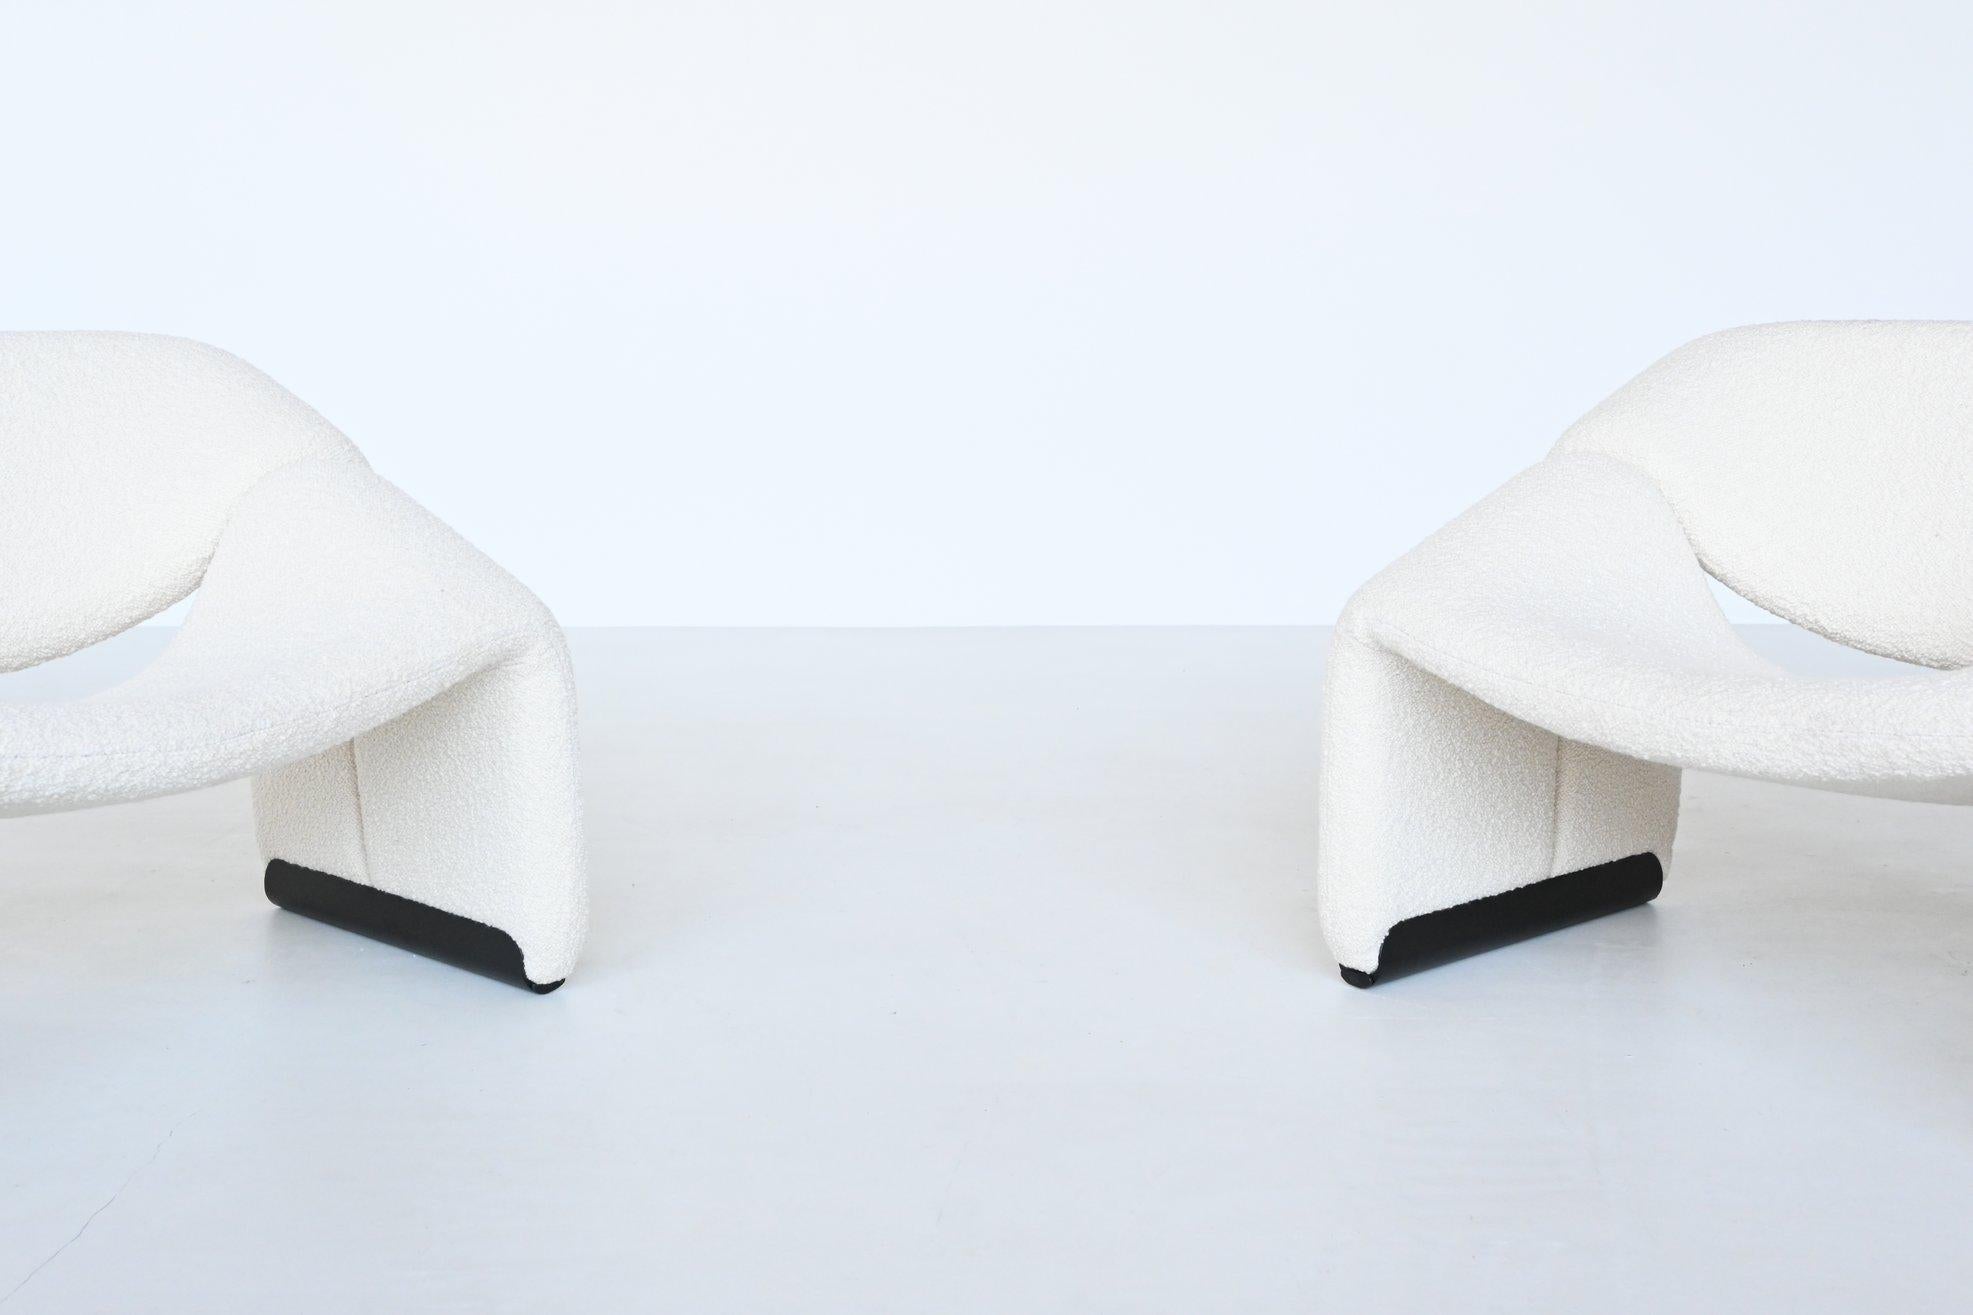 Late 20th Century Pierre Paulin Pair of Groovy Lounge Chairs Artifort, the Netherlands, 1972